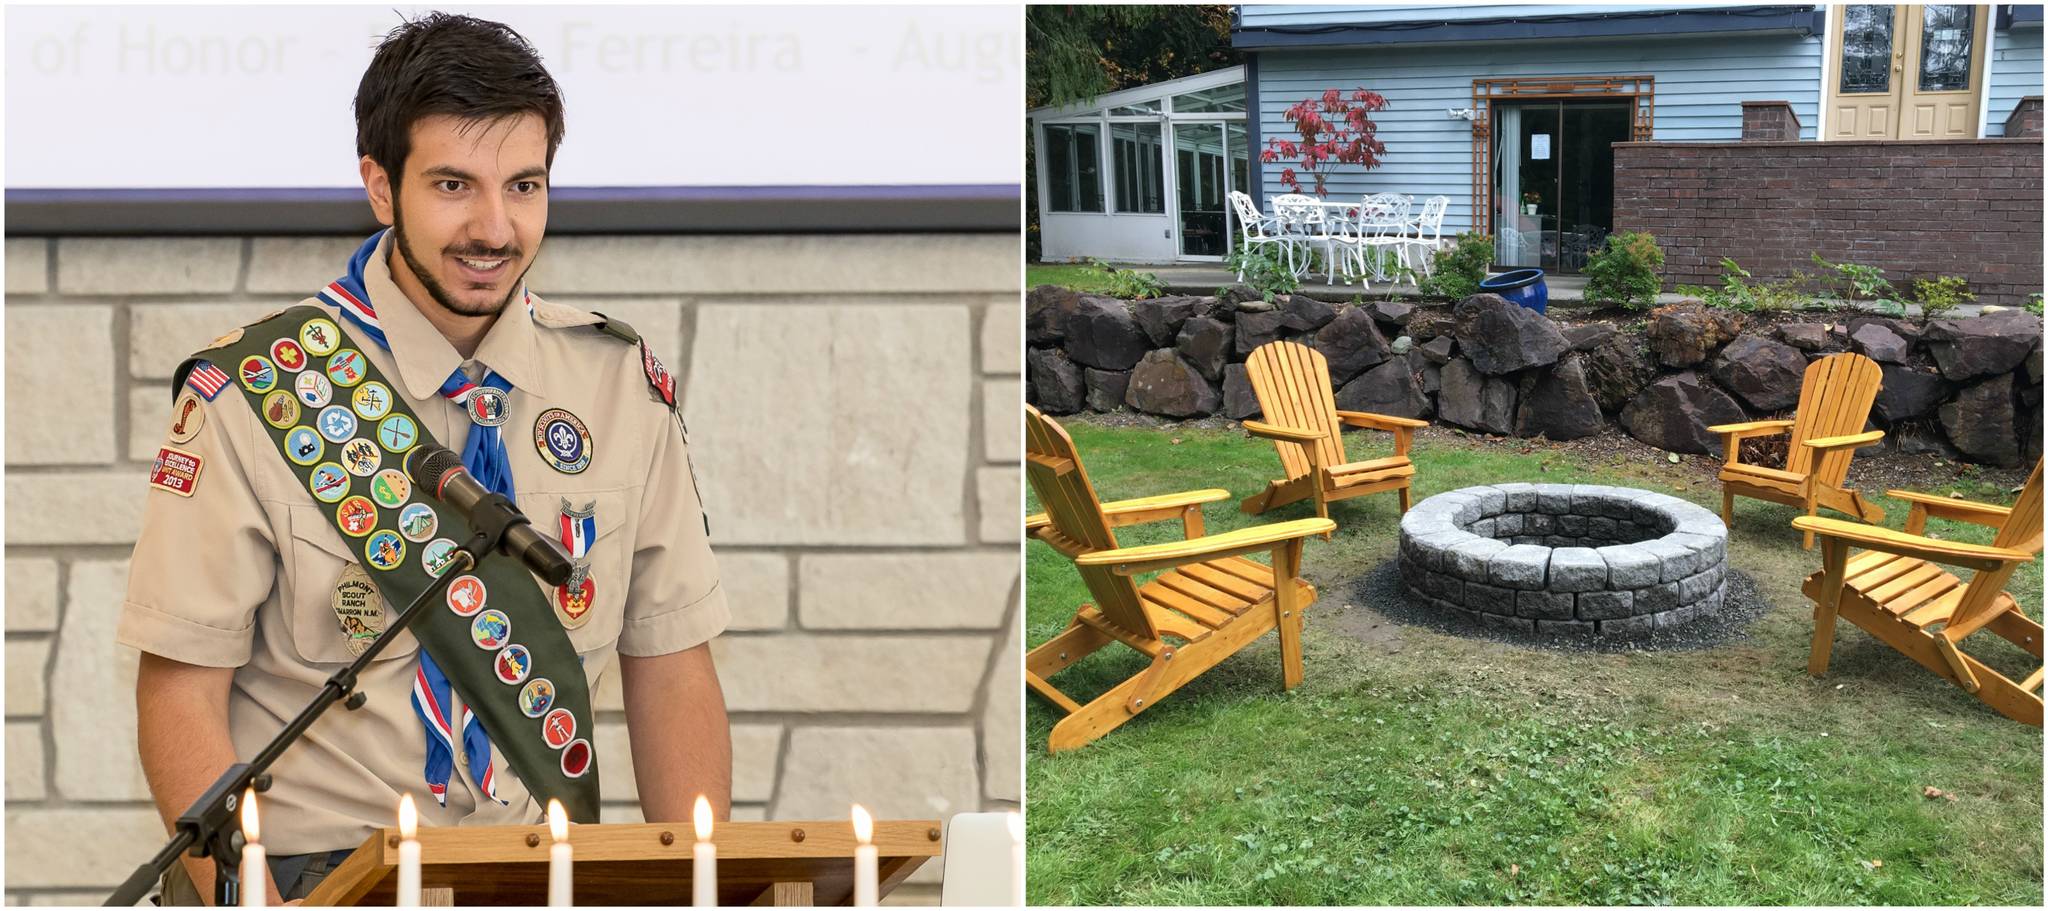 Bear Creek senior Philip Ferreira recently celebrated his Eagle Scout Court of Honor at St. Thomas Episcopal Church in Medina. He is a member of Boy Scouts of America Troop 575, which meets at Timberlake Christian Church in Redmond. For his Eagle Service Project, he organized and led troop members in building a fire pit and four Adirondack chairs for Acres of Diamonds, a transitional home for women and children in Duvall. Courtesy photos